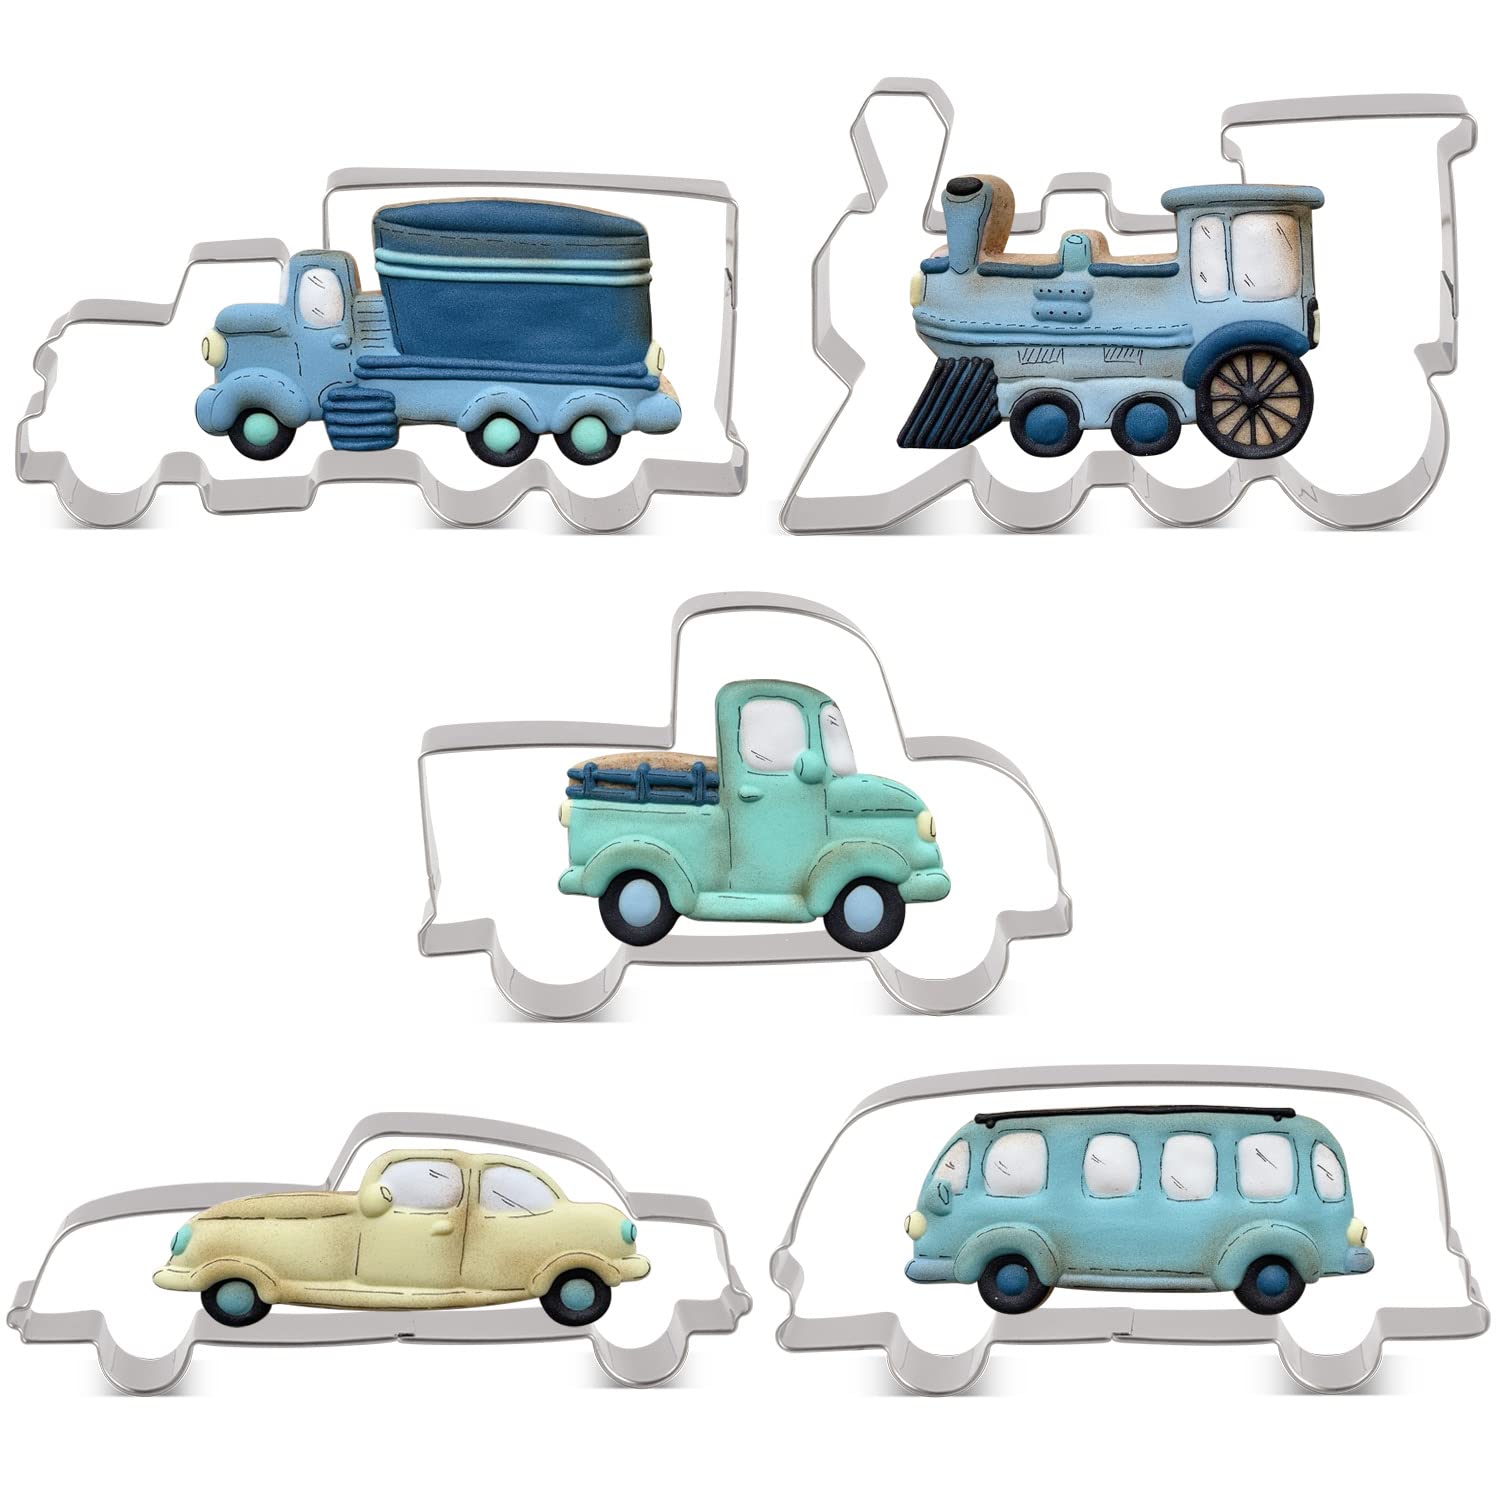 LILIAO Transportation Cookie Cutter Set - 5 Piece - Train, Truck, Pick-up Truck, Beat-up Car and Bus Fondant Cutters - Stainless Steel